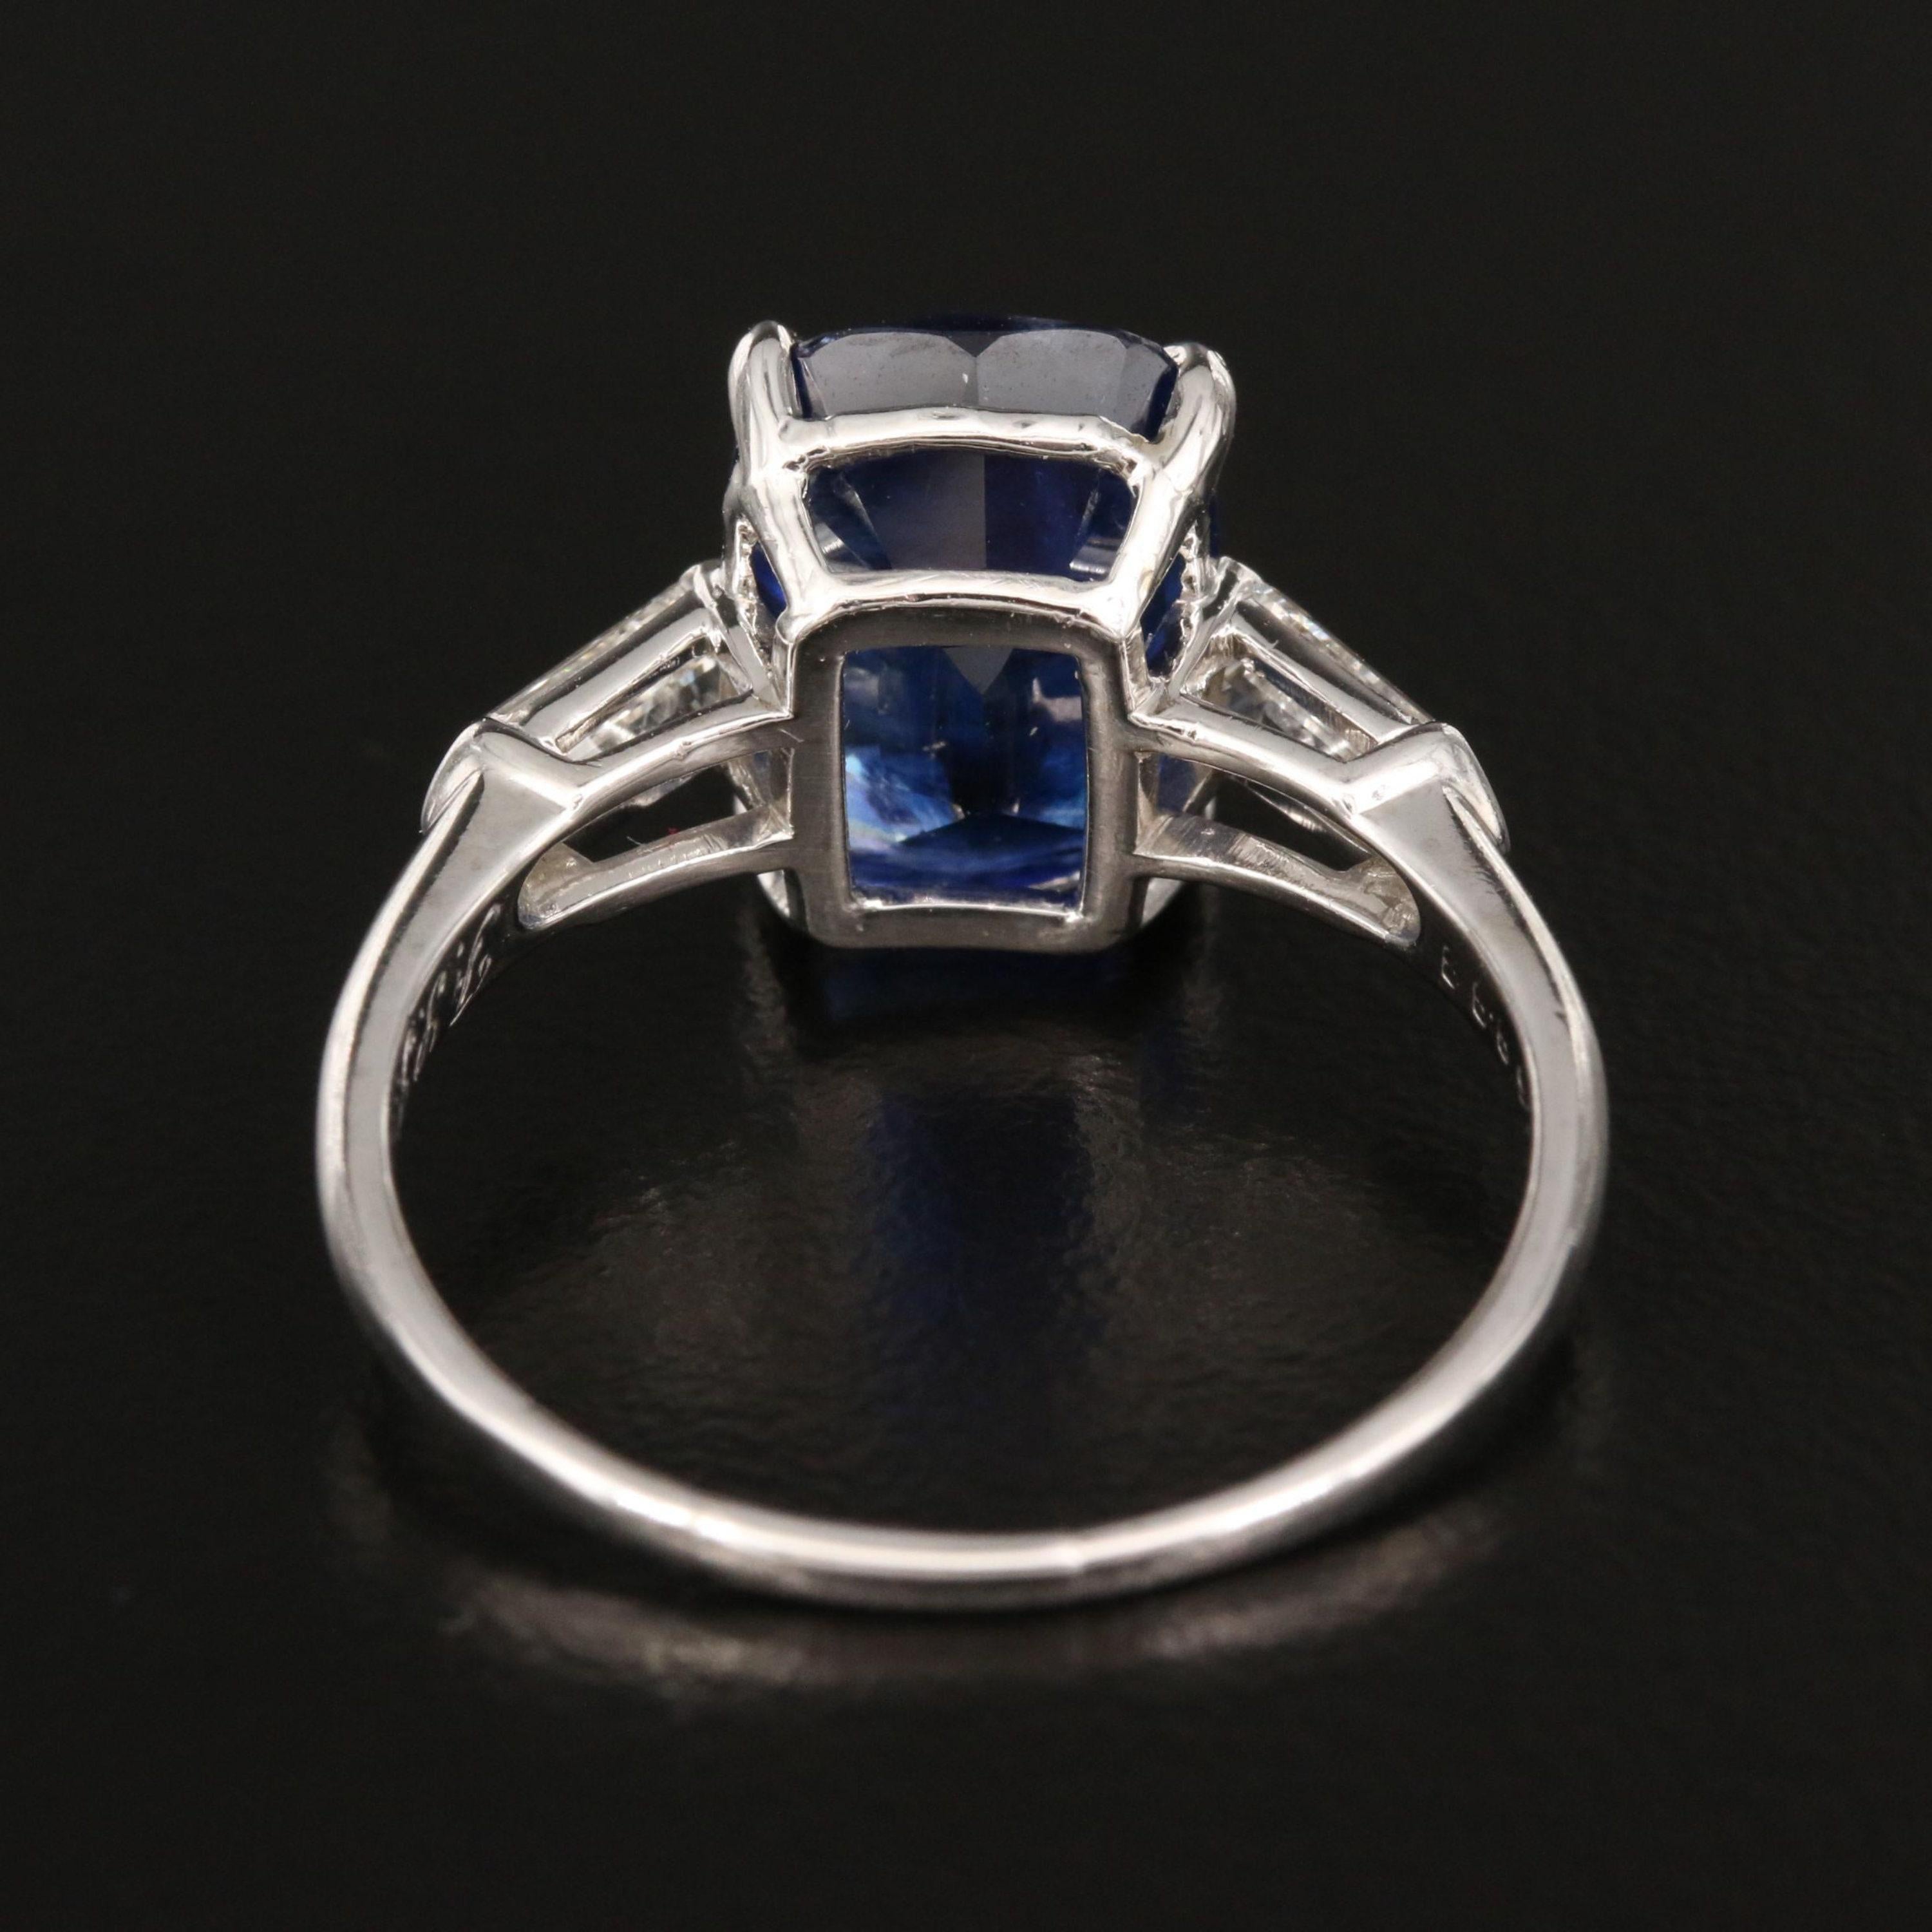 For Sale:  5 Carat Sapphire and Diamond Engagement Ring, White Gold Three Stone Ring 4